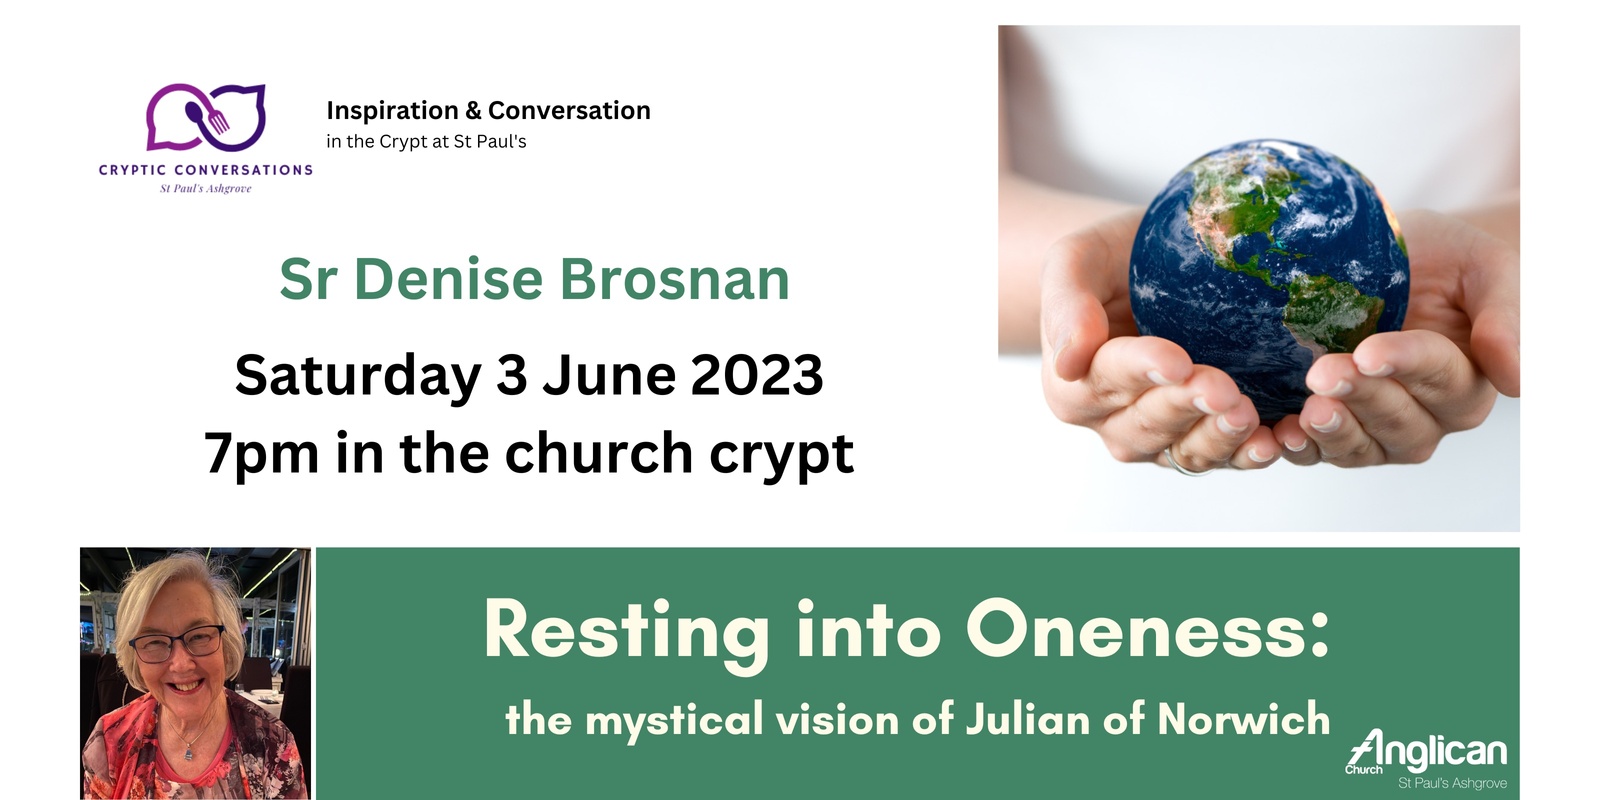 Resting into Oneness: the mystical vision of Julian of Norwich